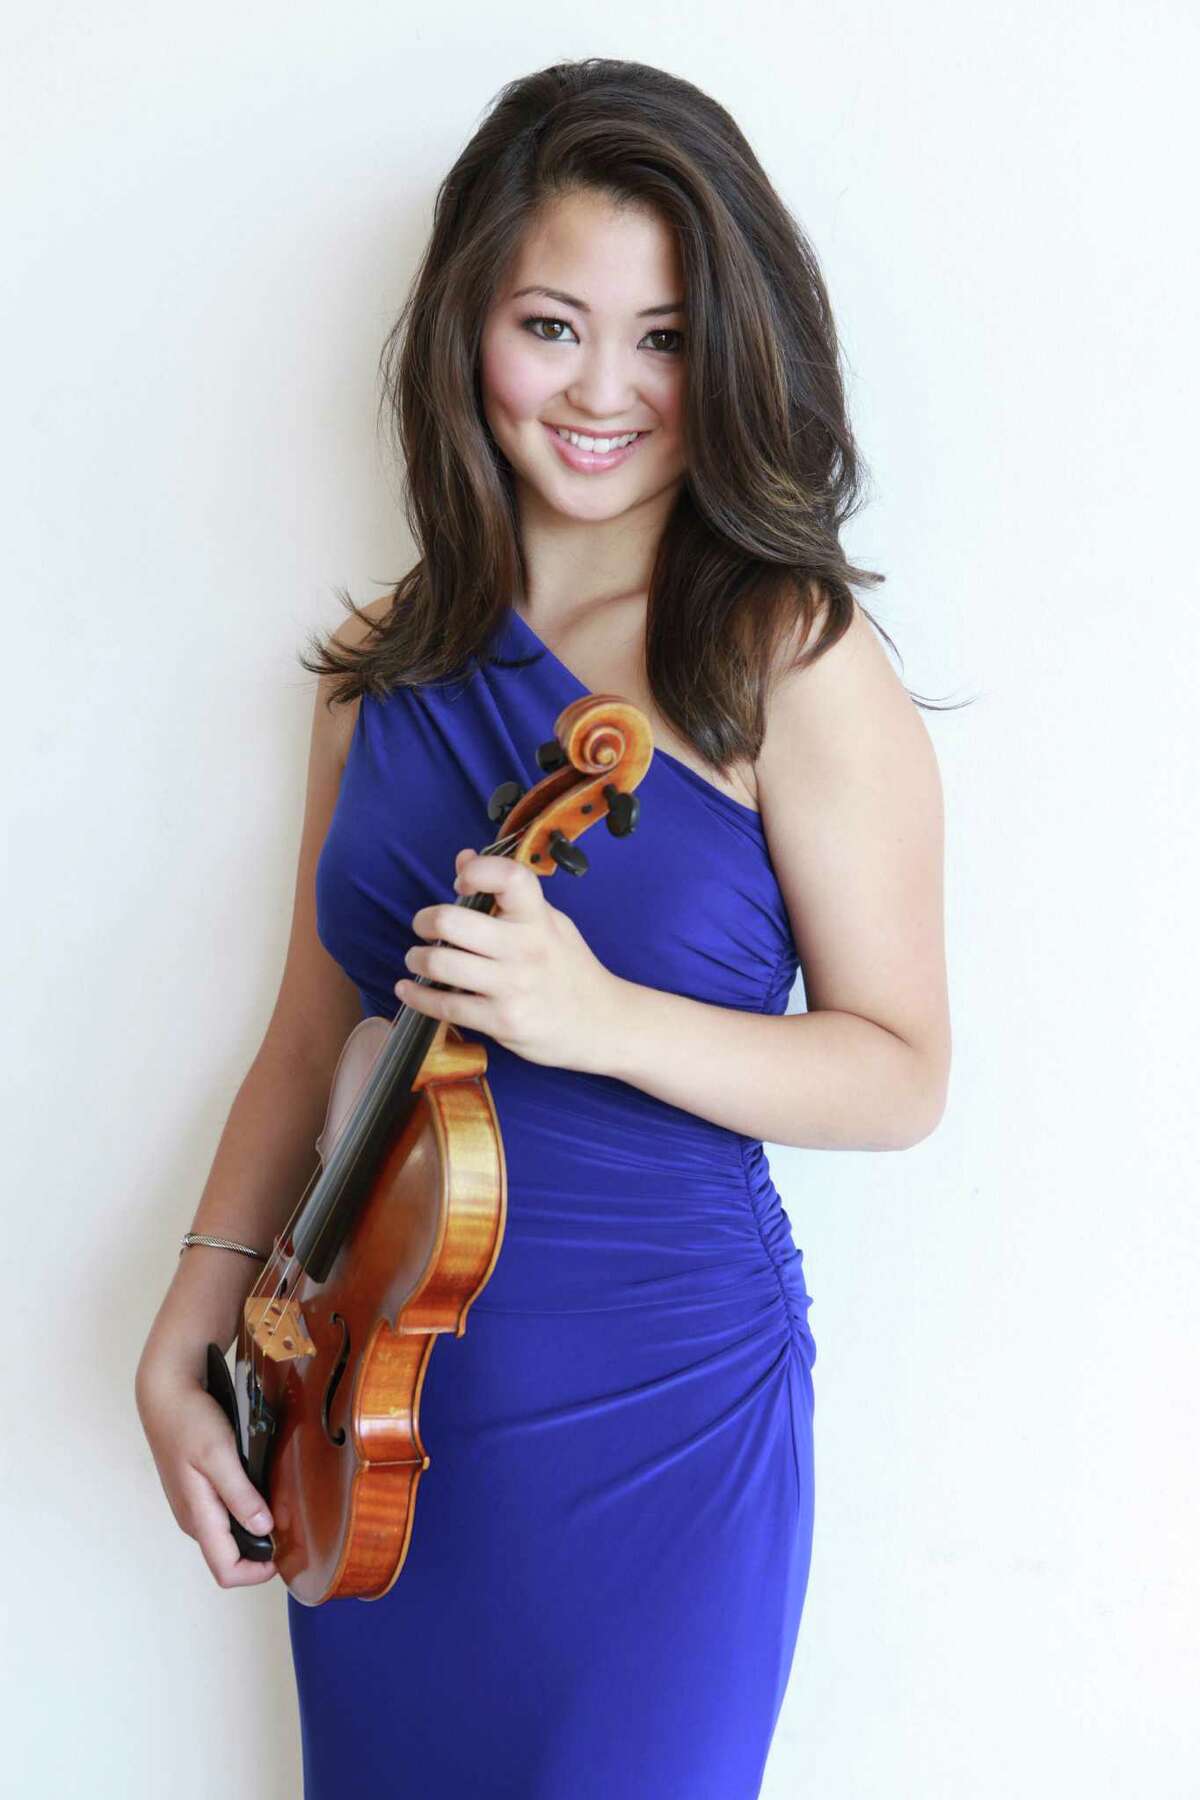 Violinist Simone Porter, a rising classical music star, made her professional debut at 10 with her hometown orchestra, the Seattle Symphony, and soloed with the Los Angeles Philharmonic at the Hollywood Bowl when she was 17. Barely out of her teens, she also has made multiple appearances on the NPR show “From the Top.” She will be accompanied by pianist Armen Guzelimian. 2 p.m. Tuesday. Laurel Heights United Methodist Church, 227 W. Woodlawn Ave. $25. satmc.org -- Jim Kiest